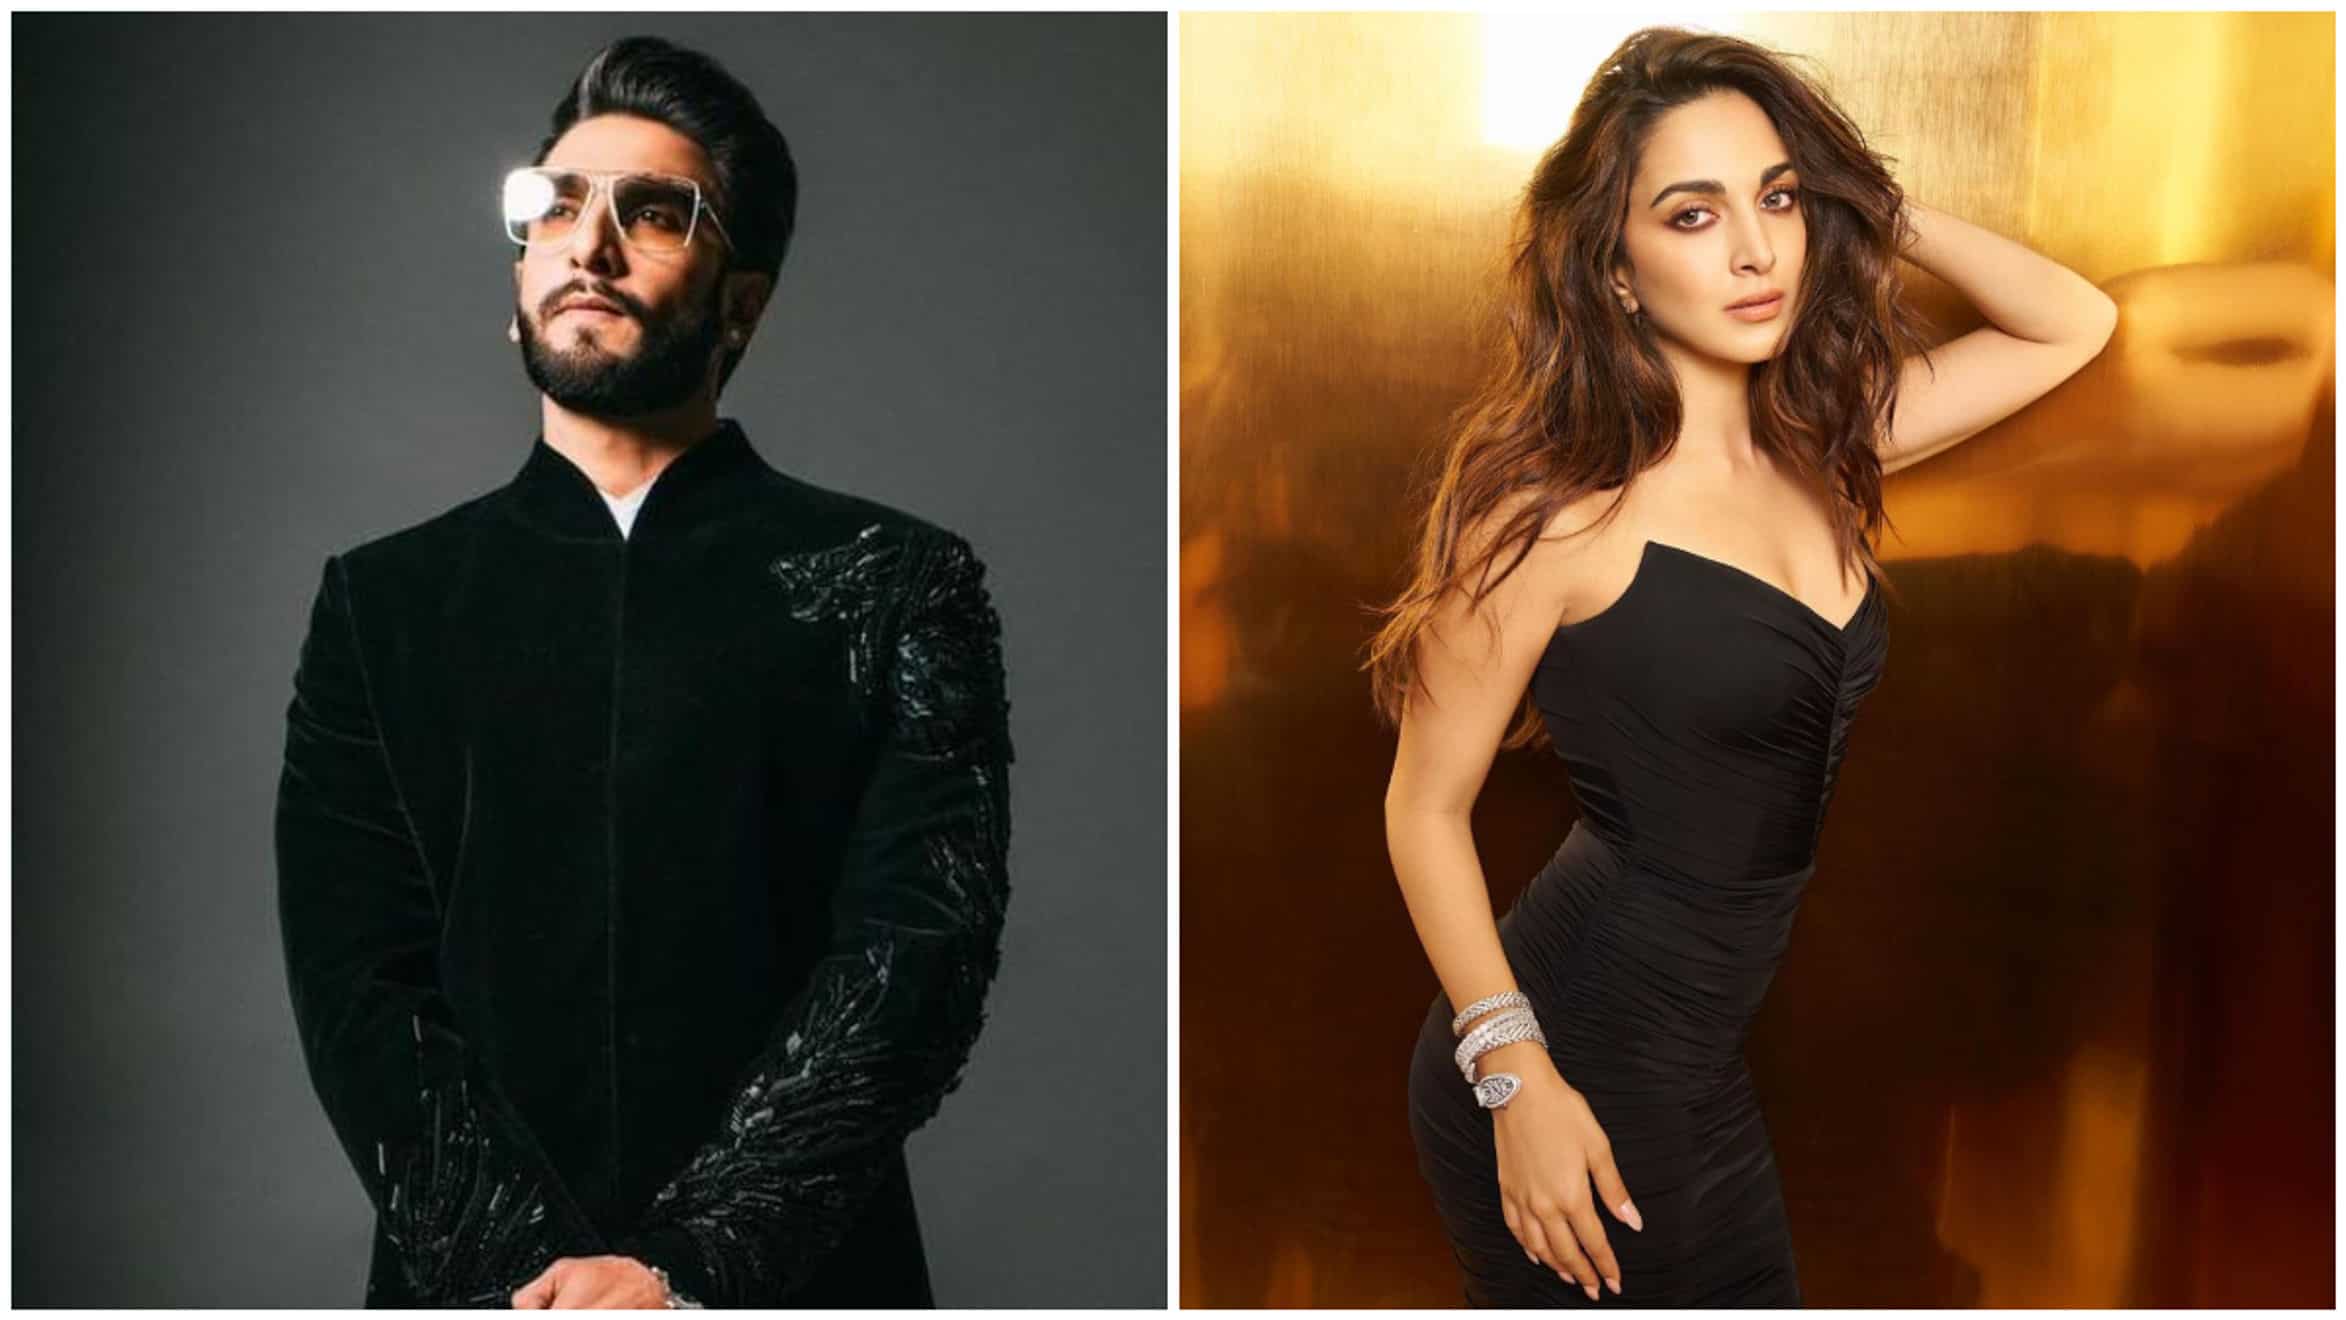 https://www.mobilemasala.com/movies/Don-3---Ranveer-Singh-Kiara-Advani-to-commence-training-for-the-film-in-March-with-experts-i218348